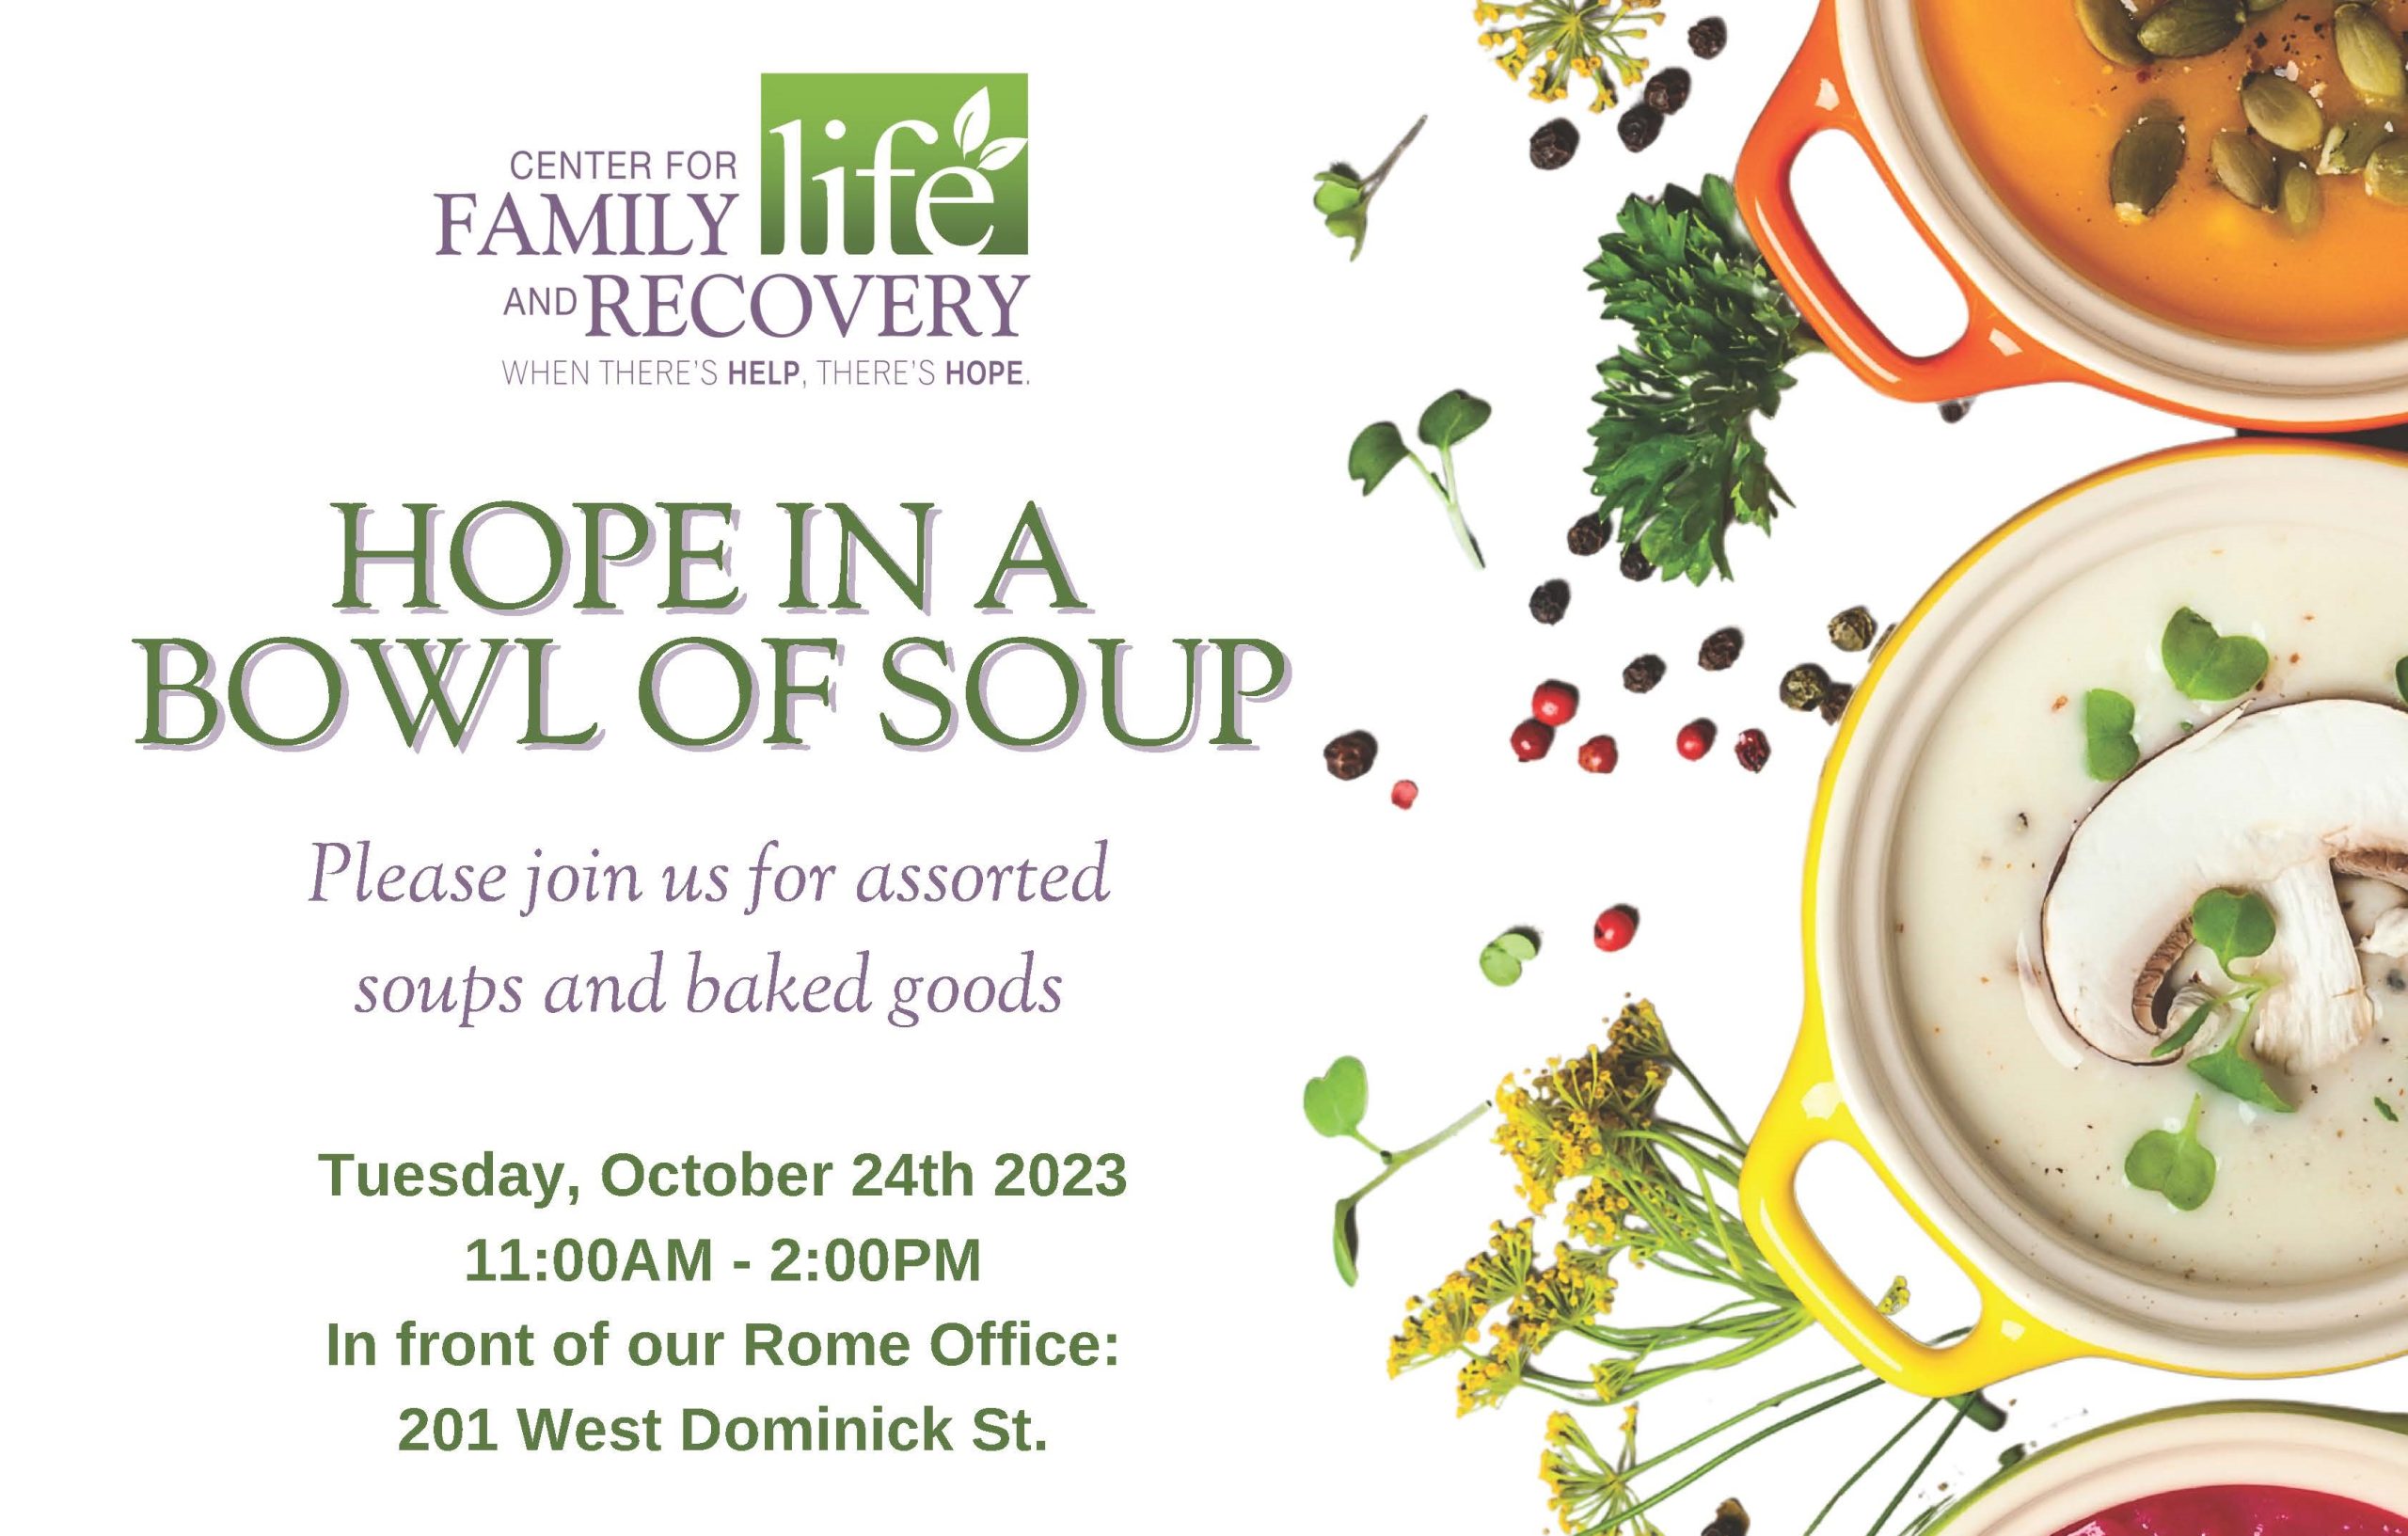 Center for Family Life and Recovery, Inc. Introduces “Hope in a Bowl of Soup”